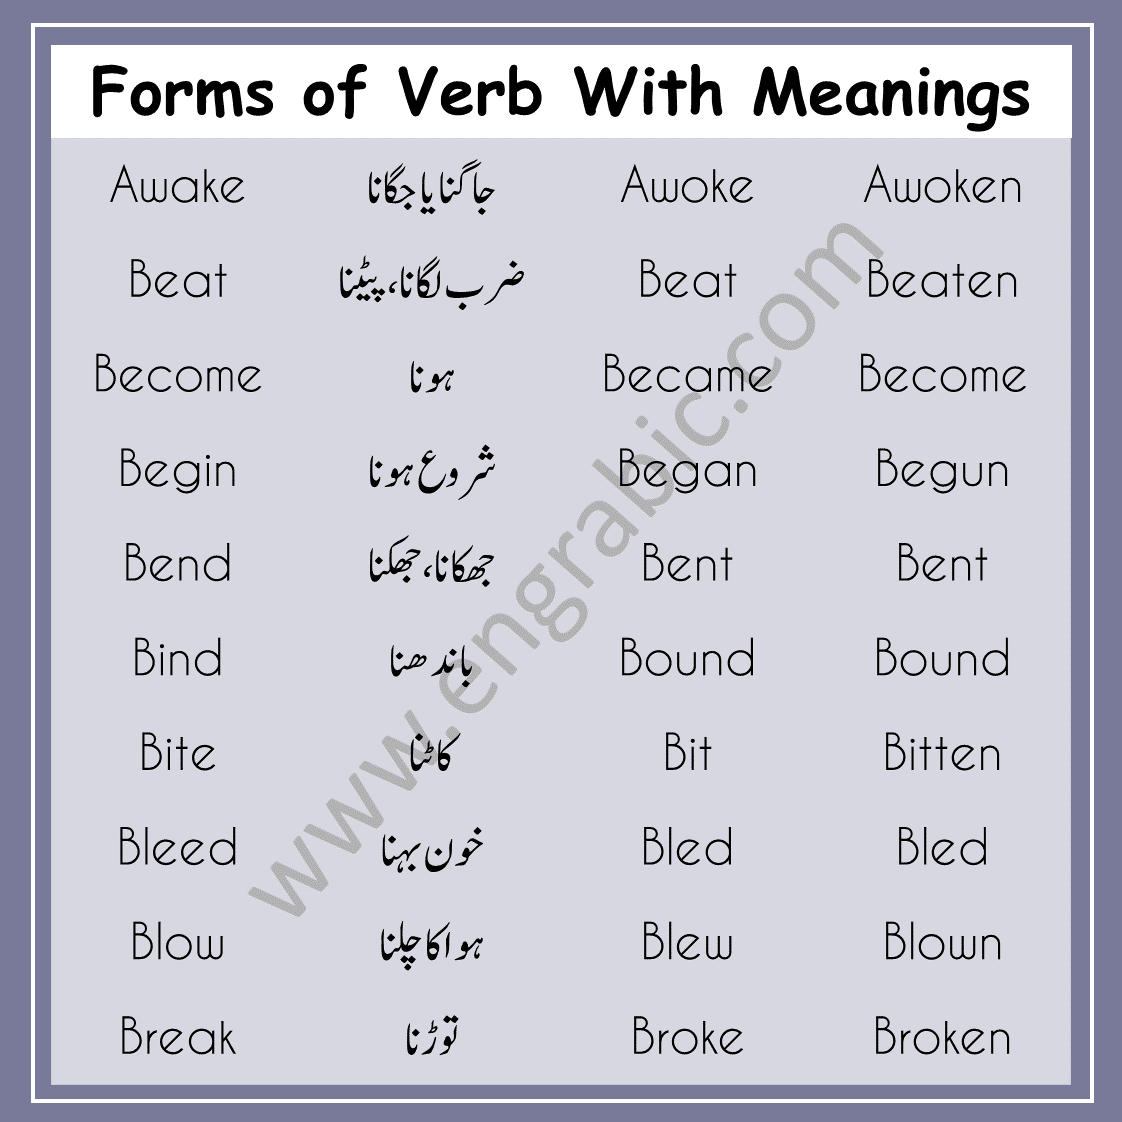 helping verbs list with urdu meaning pdf